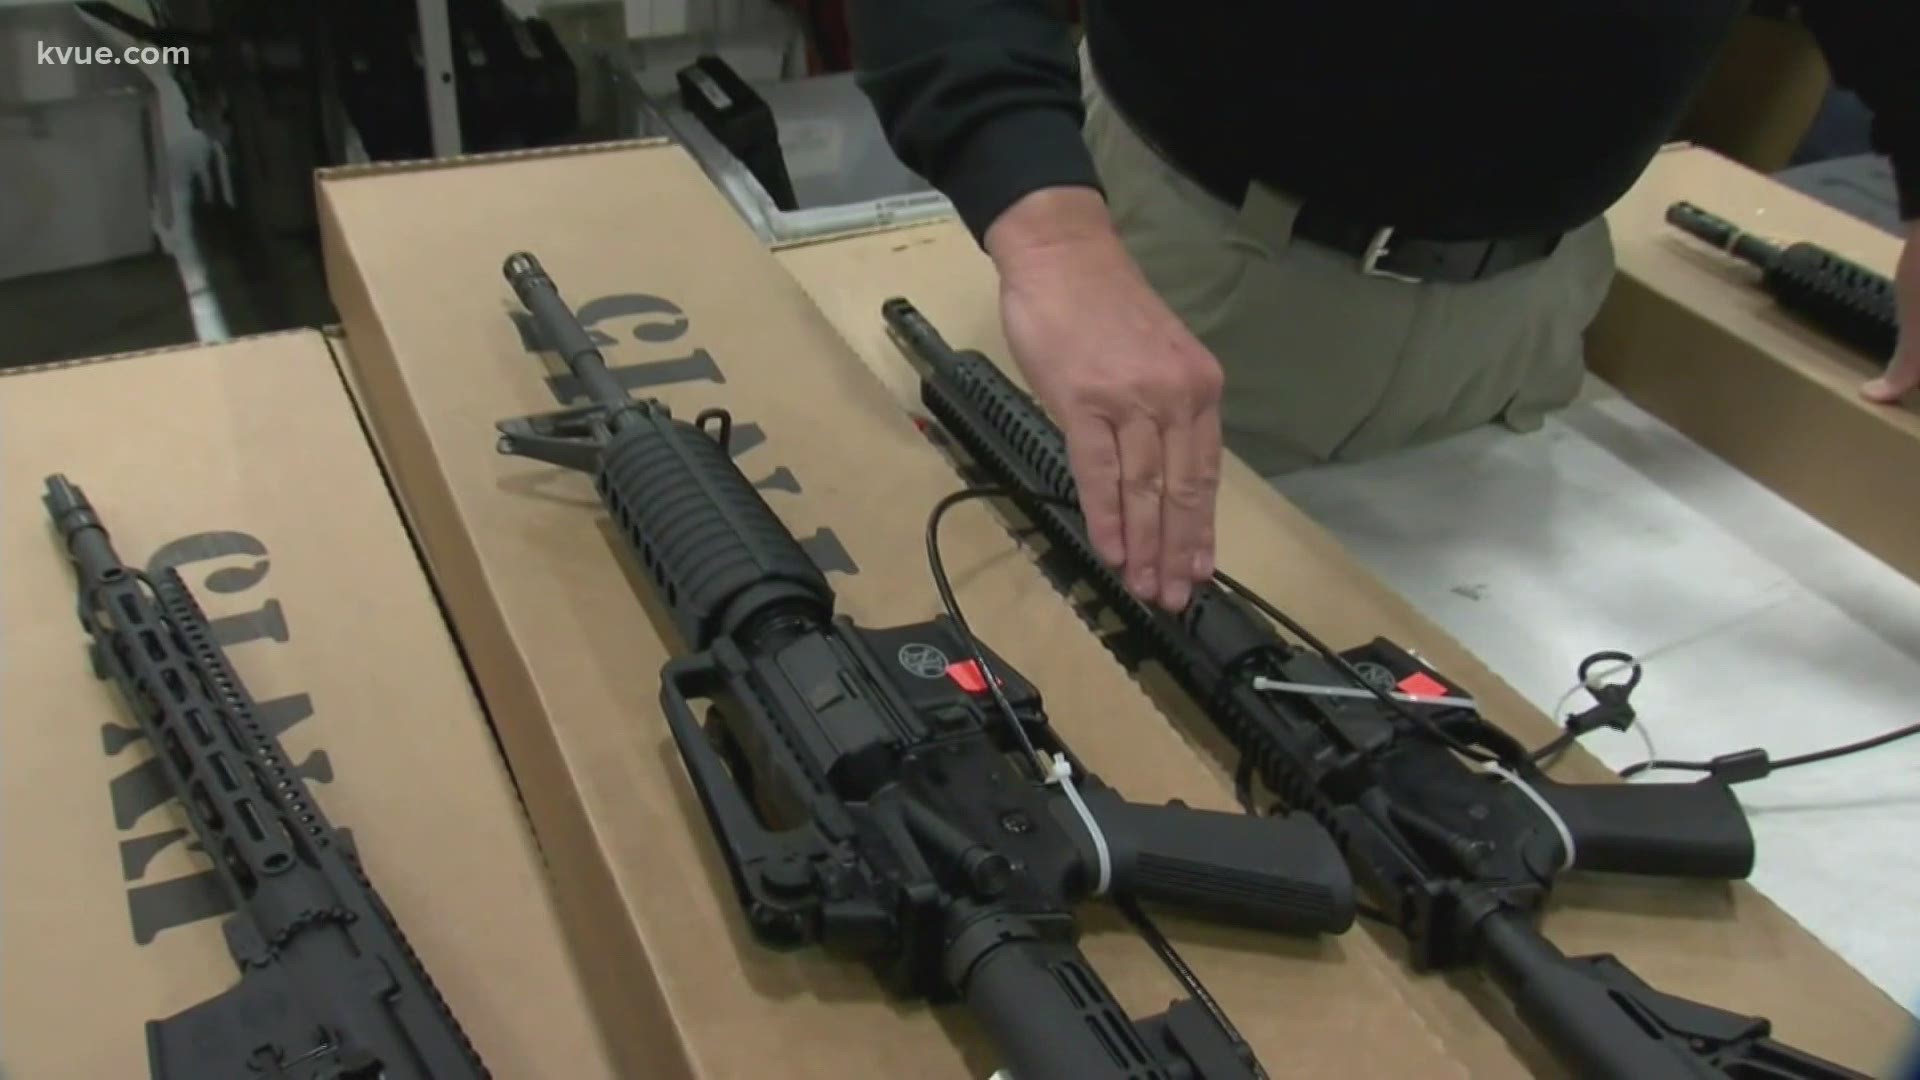 Texas lawmakers are weighing in on gun control bills in the Texas Legislature. House Bill 118 would require background checks for private gun sales.